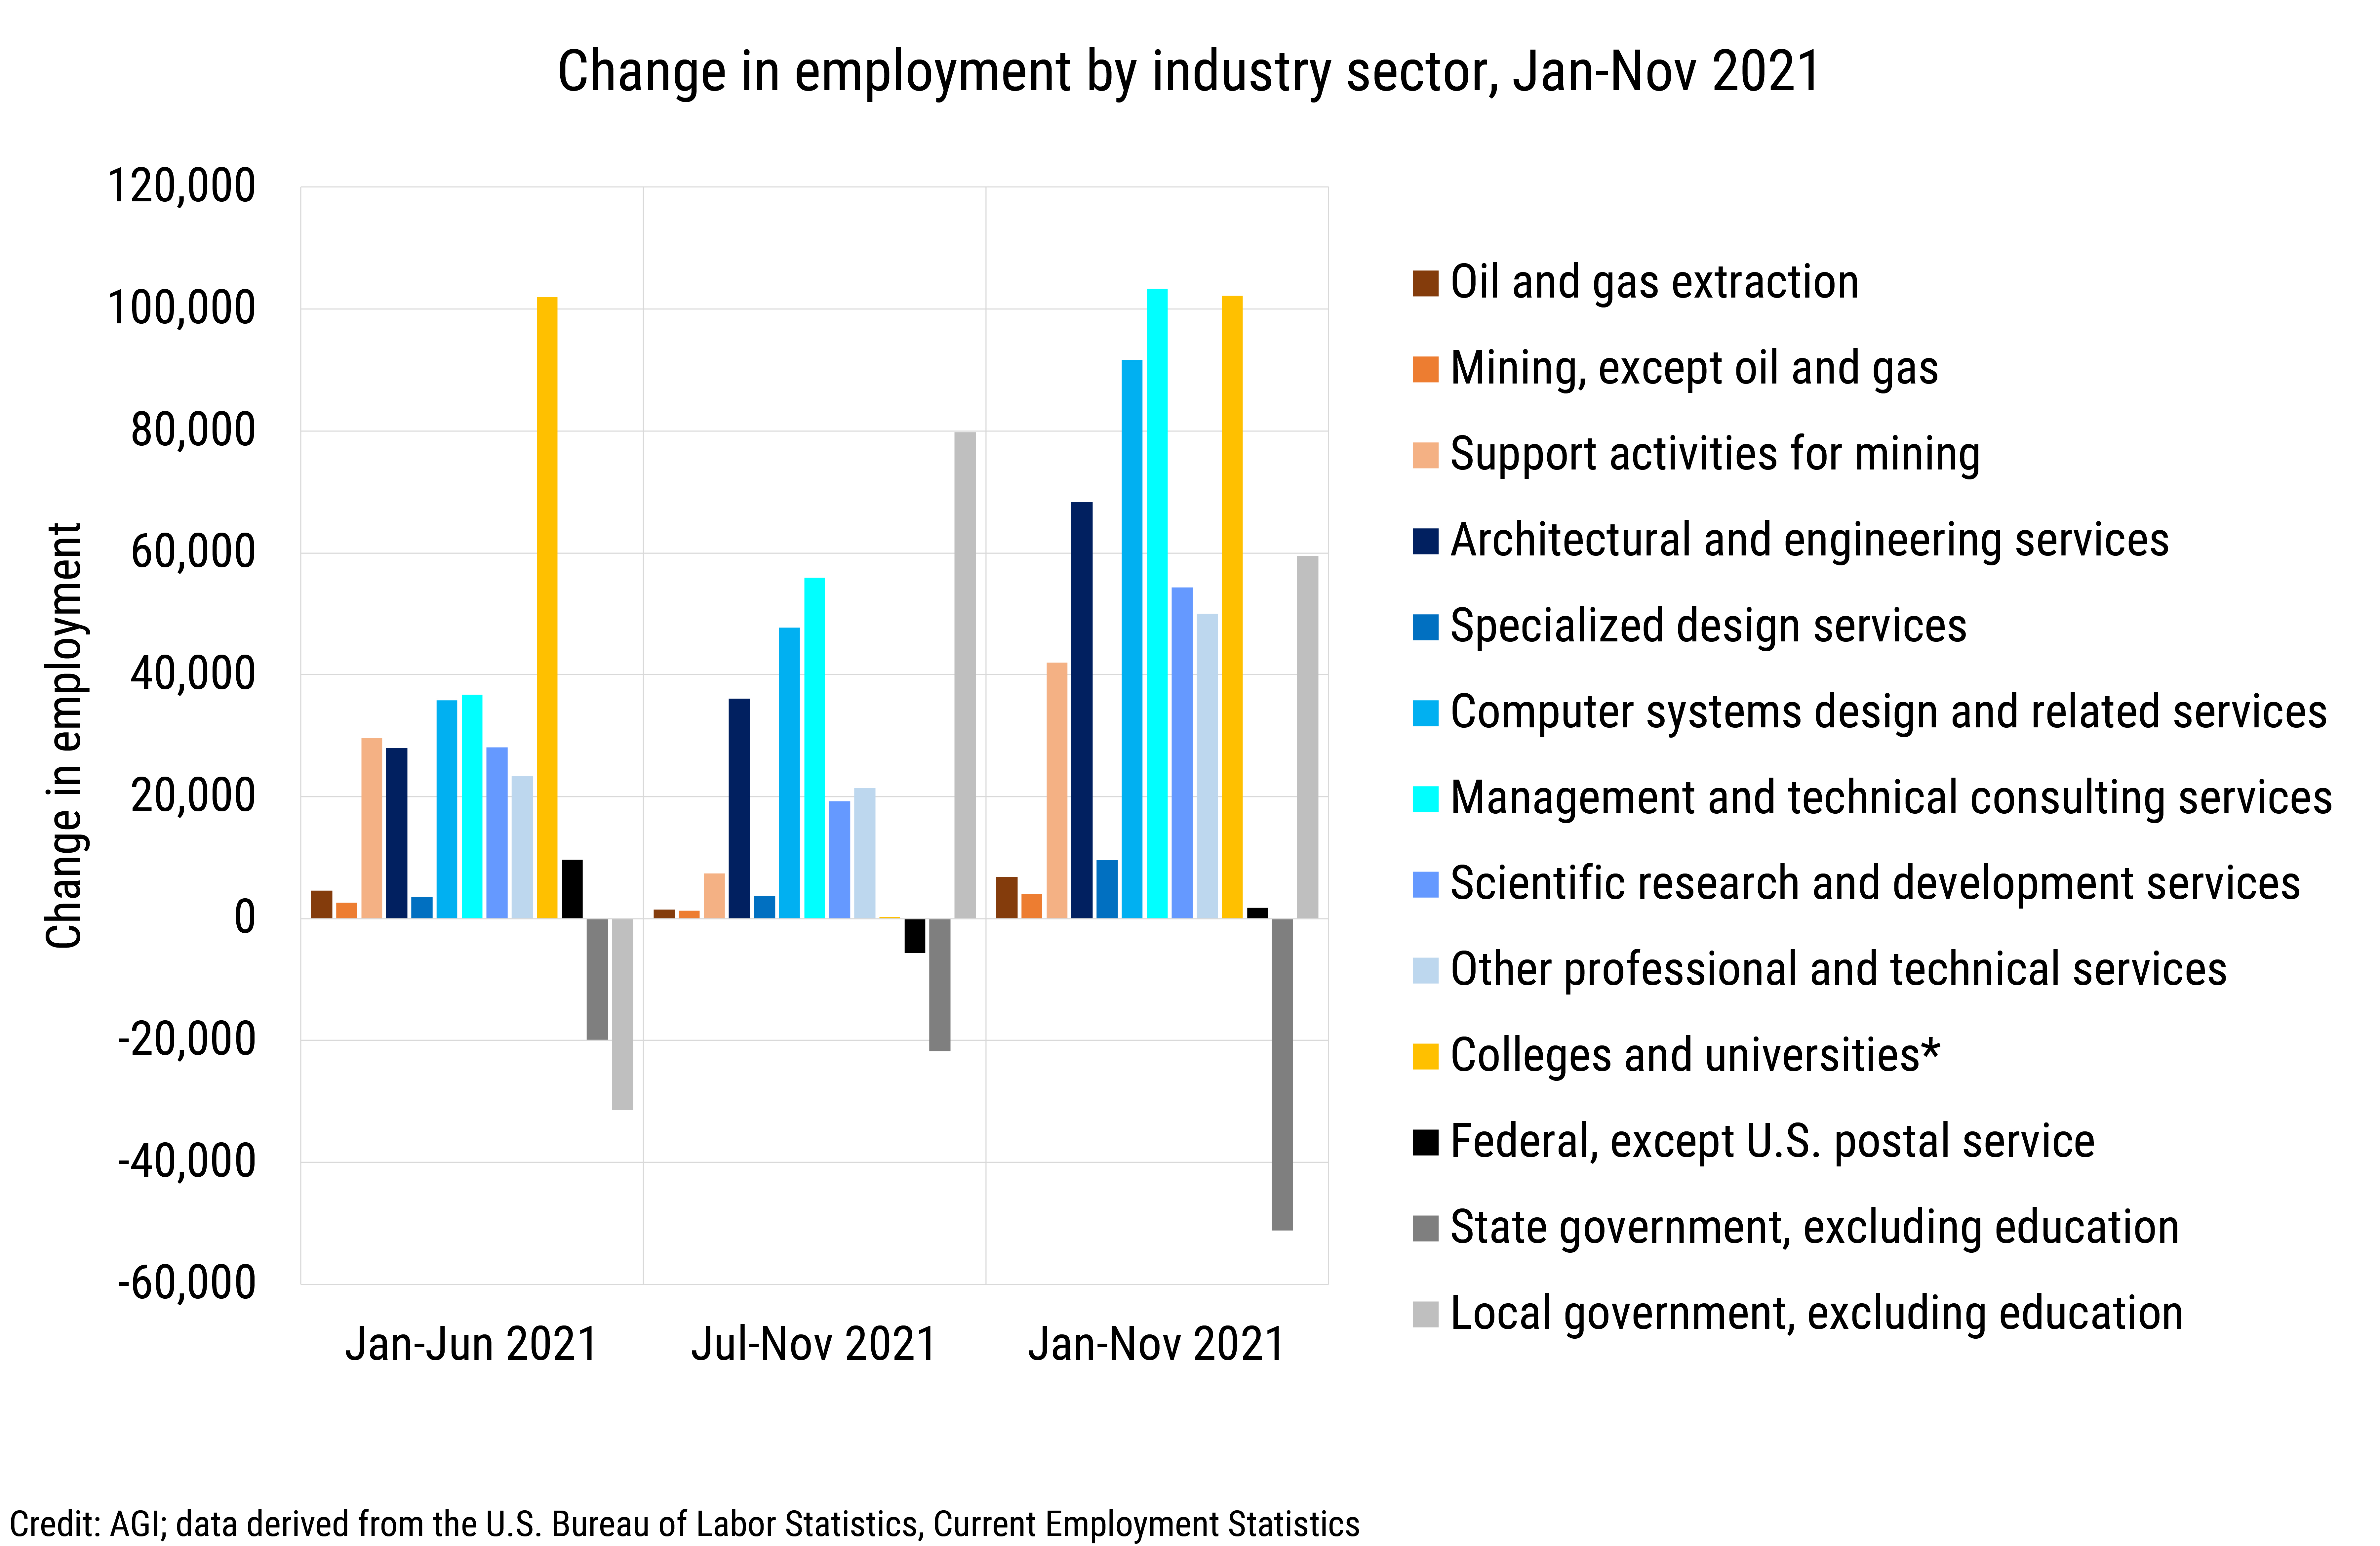 DB_2022-001 chart 04: Change in employment by industry sector, Jan-Nov 2021 (Credit: AGI; data derived from the U.S. Bureau of Labor Statistics, Current Employment Statistics)